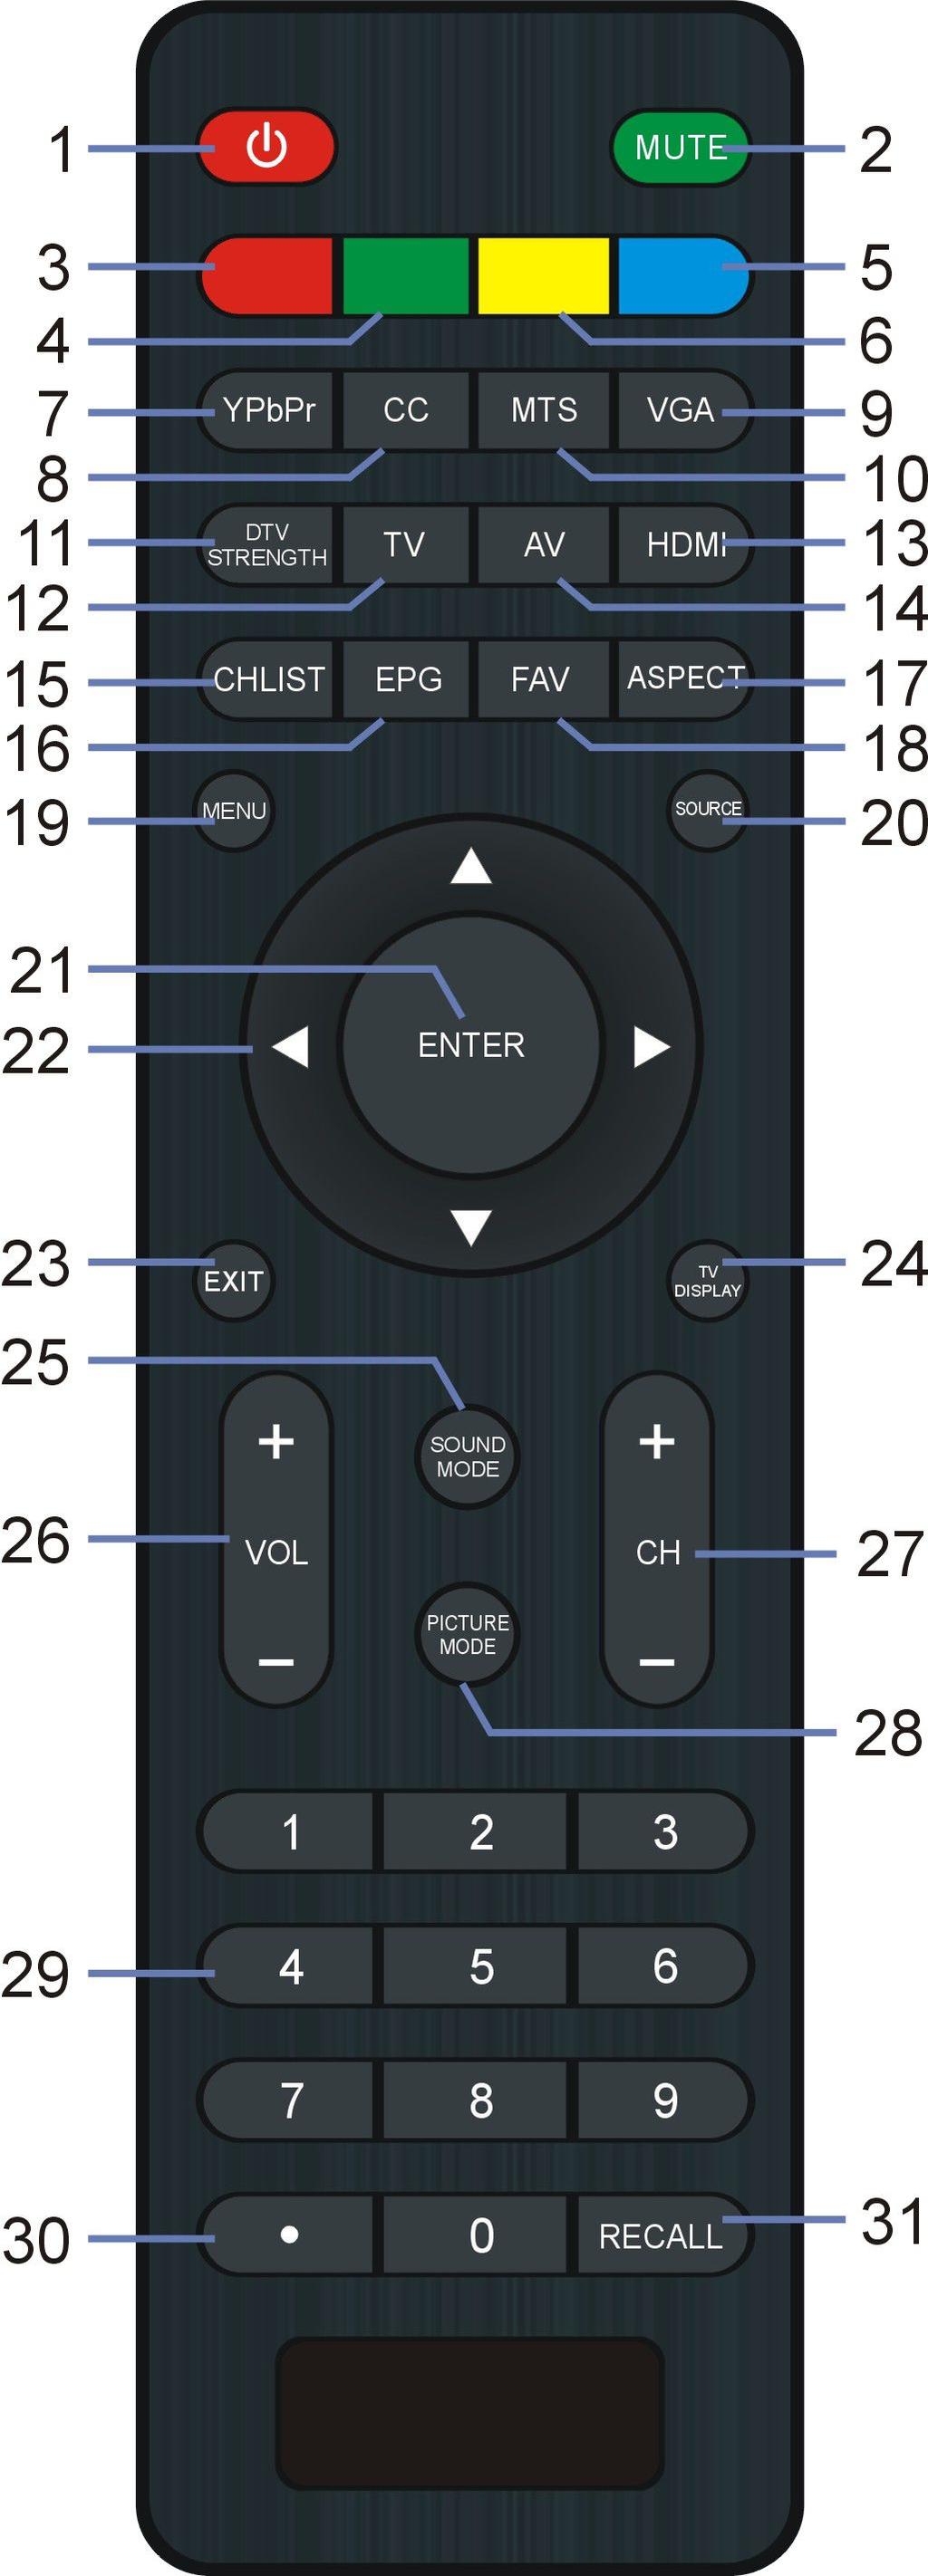 REMOTE CONTROL 21. ENTER: To confirm a selection. 22. UP/DOWN/LEFT/RIGHT navigation buttons 23. EXIT: To exit menu page. 24. TV DISPLAY: To display program information. 25.